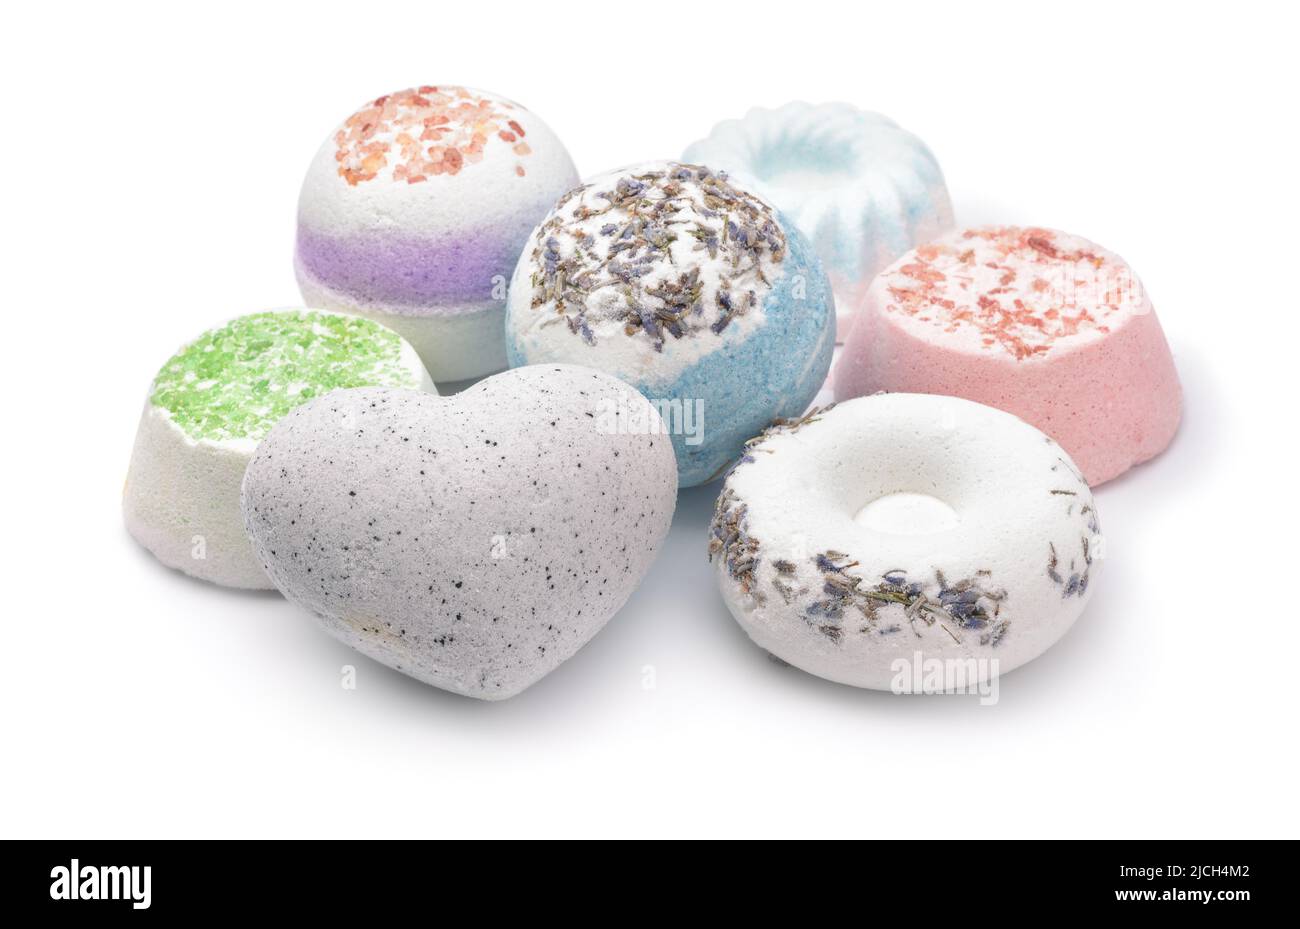 Group of various aroma bath bombs isolated on white Stock Photo